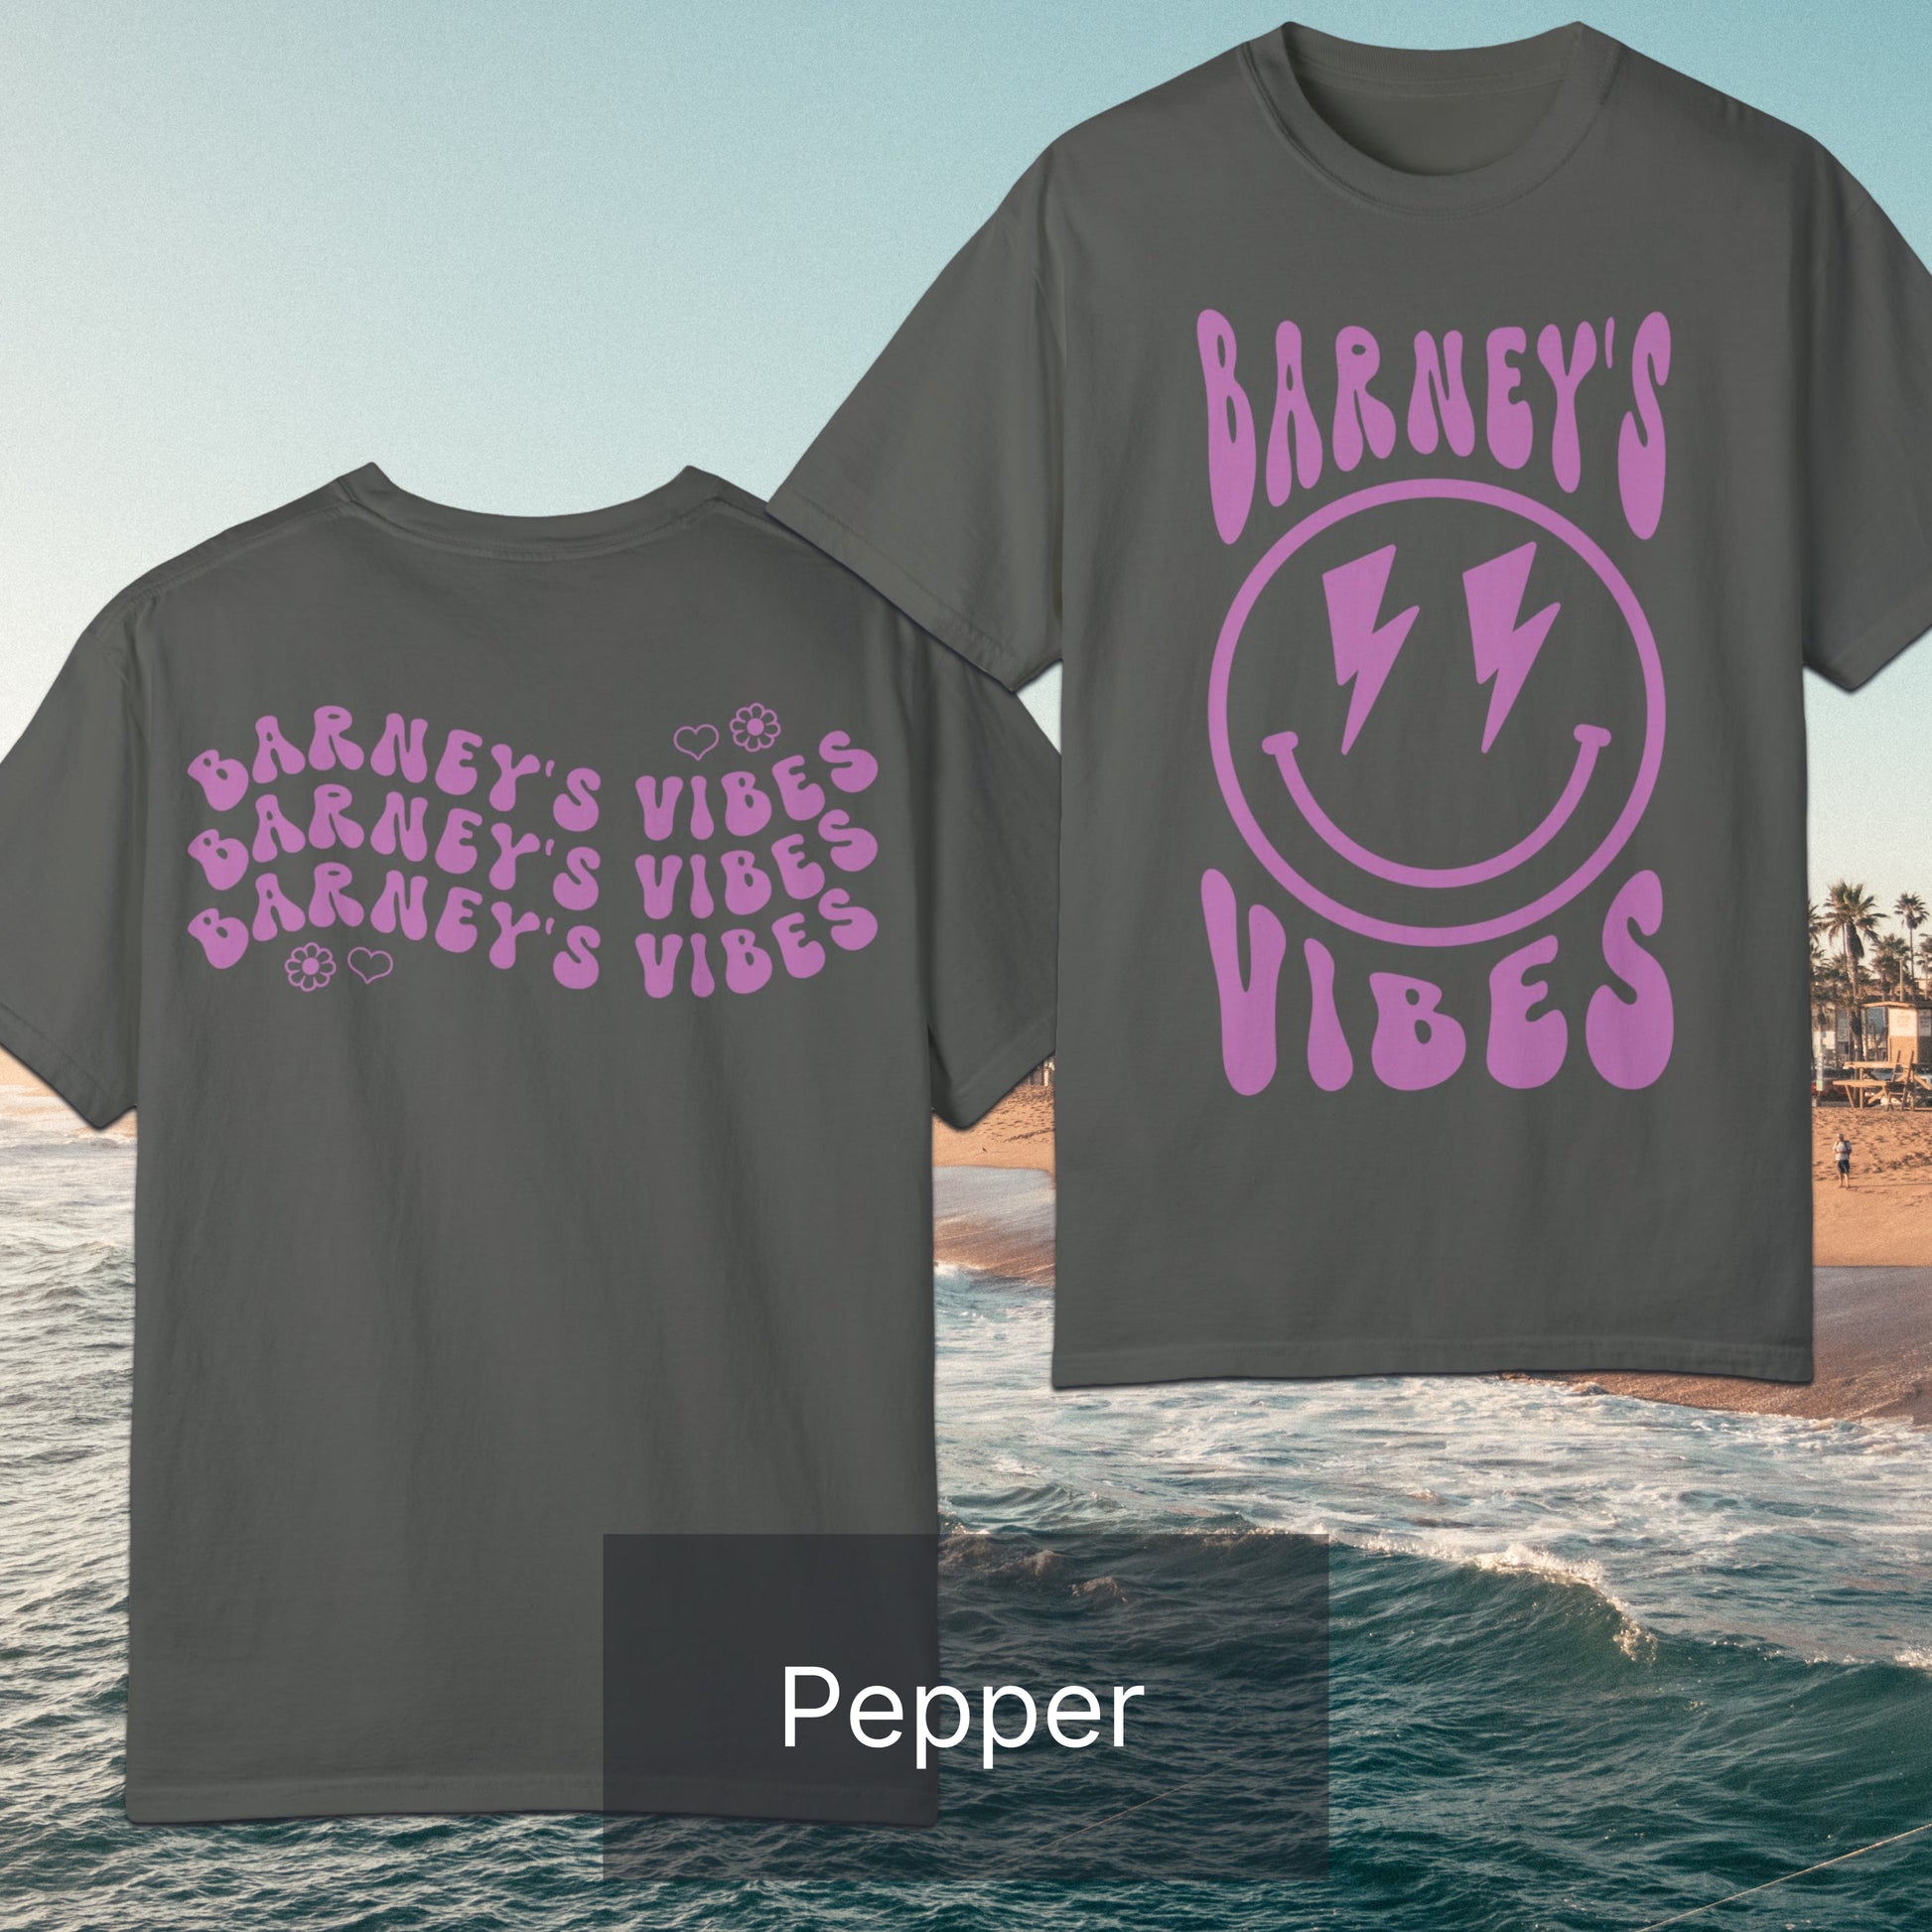 Barney's Vibes | BARNEY'S BEANERY - Women's Smiley Face Tee | Berry Graphics On Pepper T-Shirt, Front And Back Flat Lay View